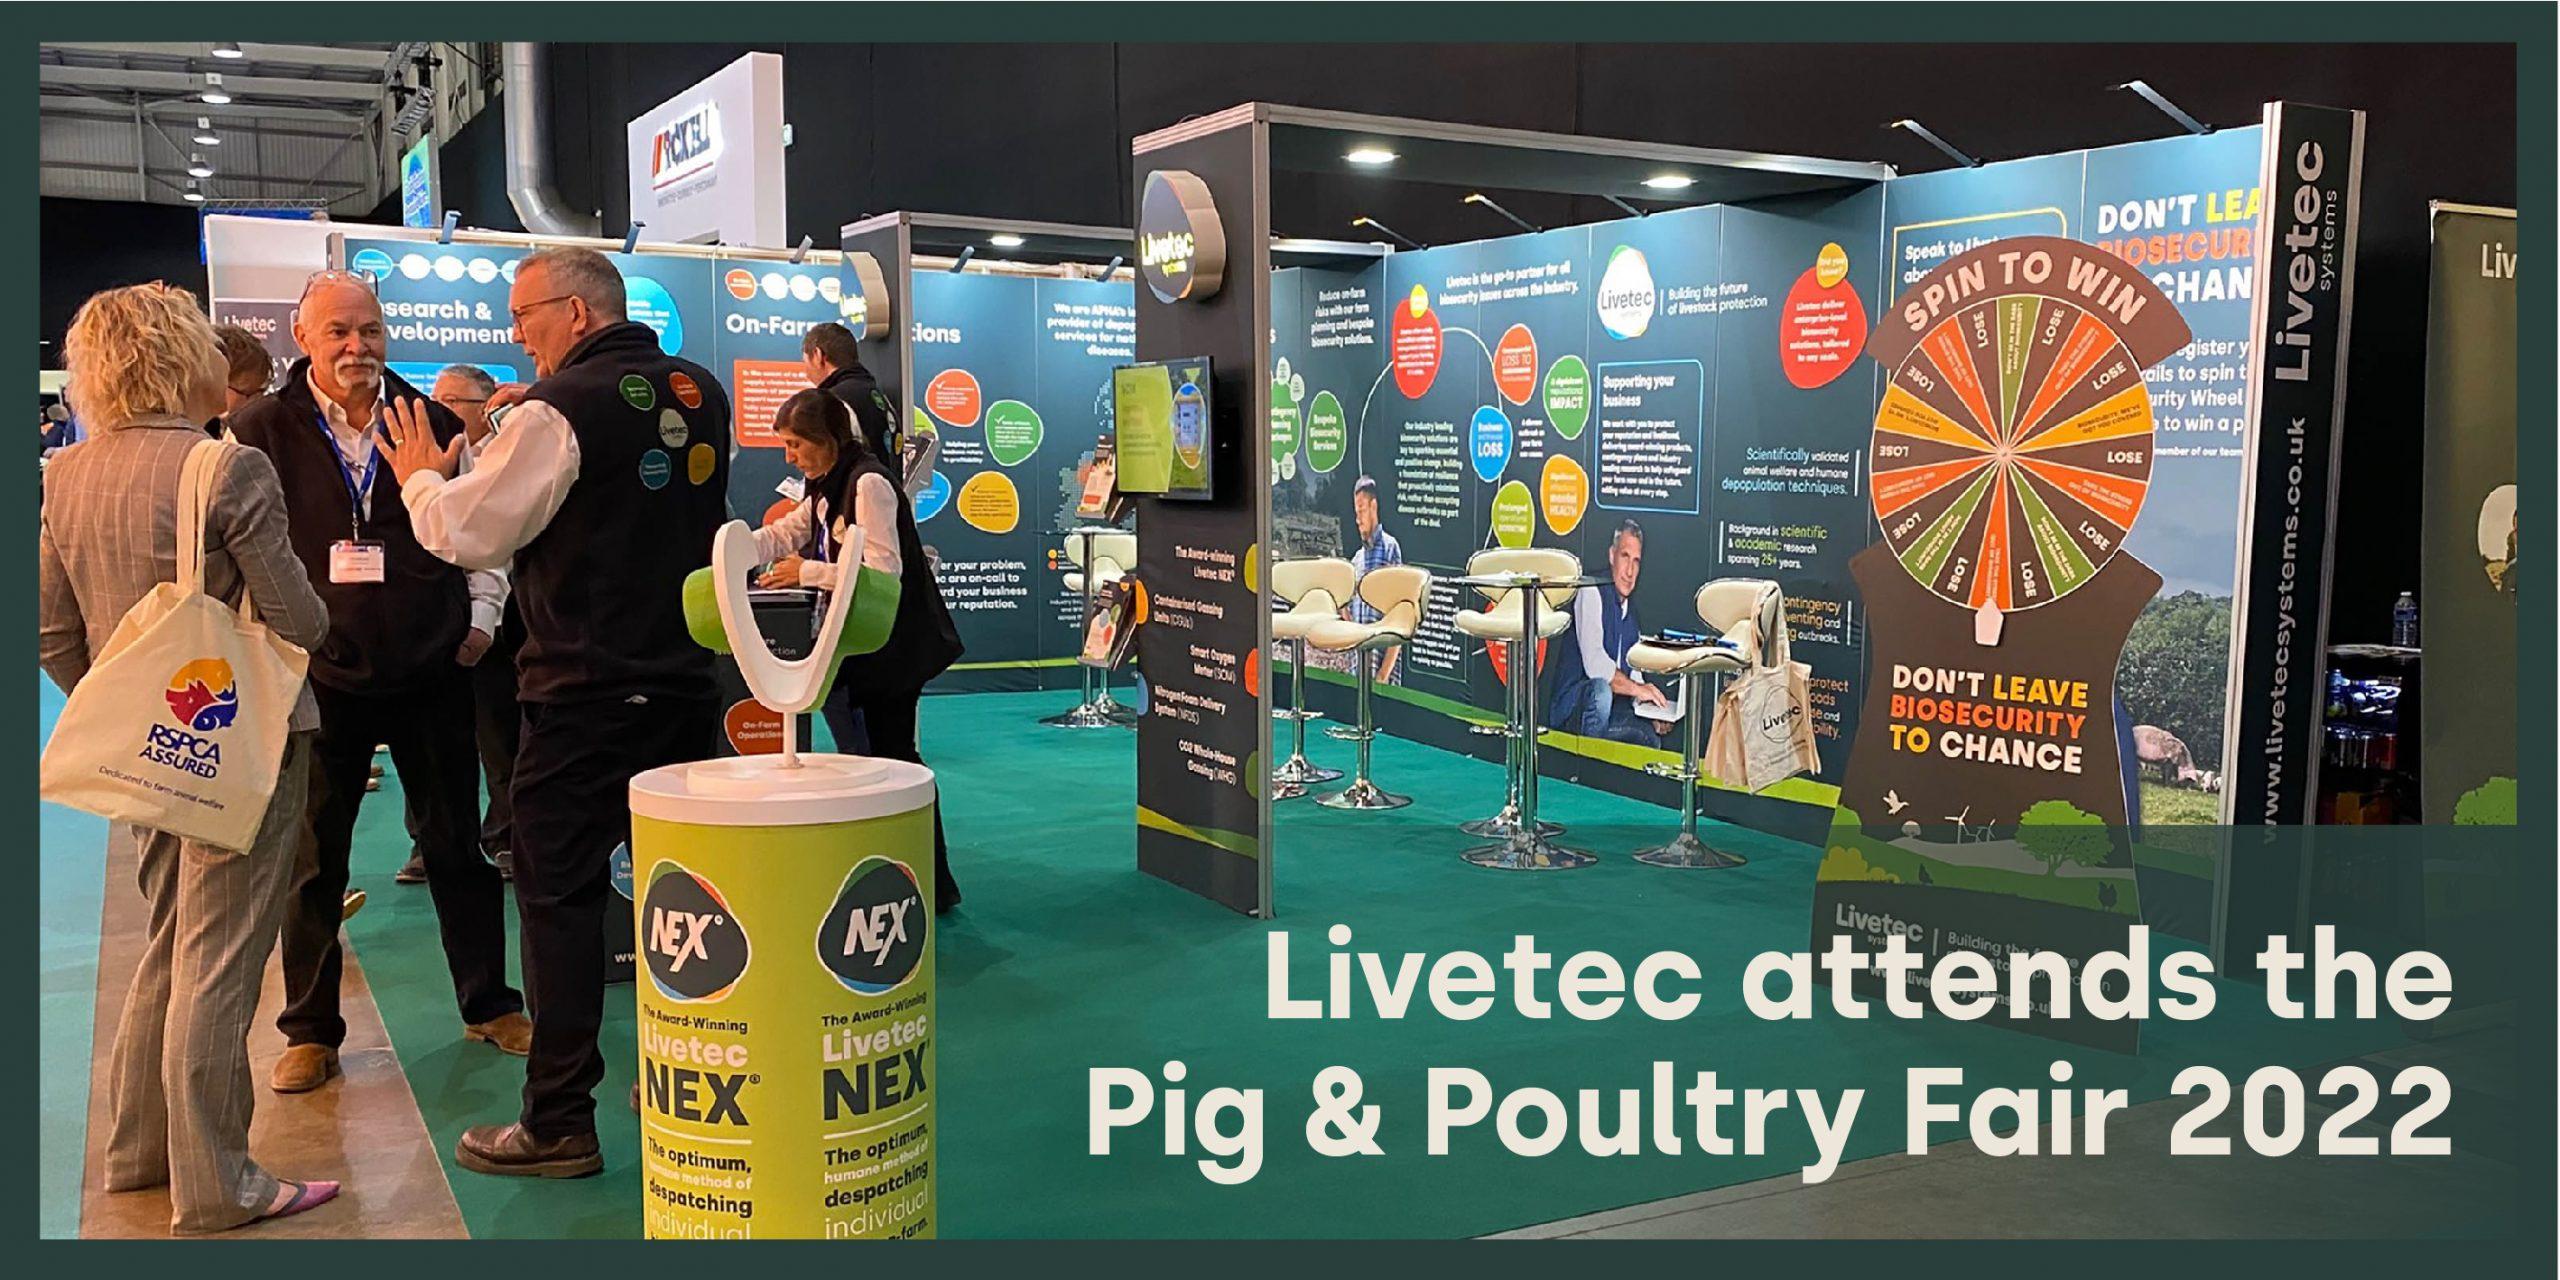 The Livetec stand at the Pig & Poultry Fair 2022